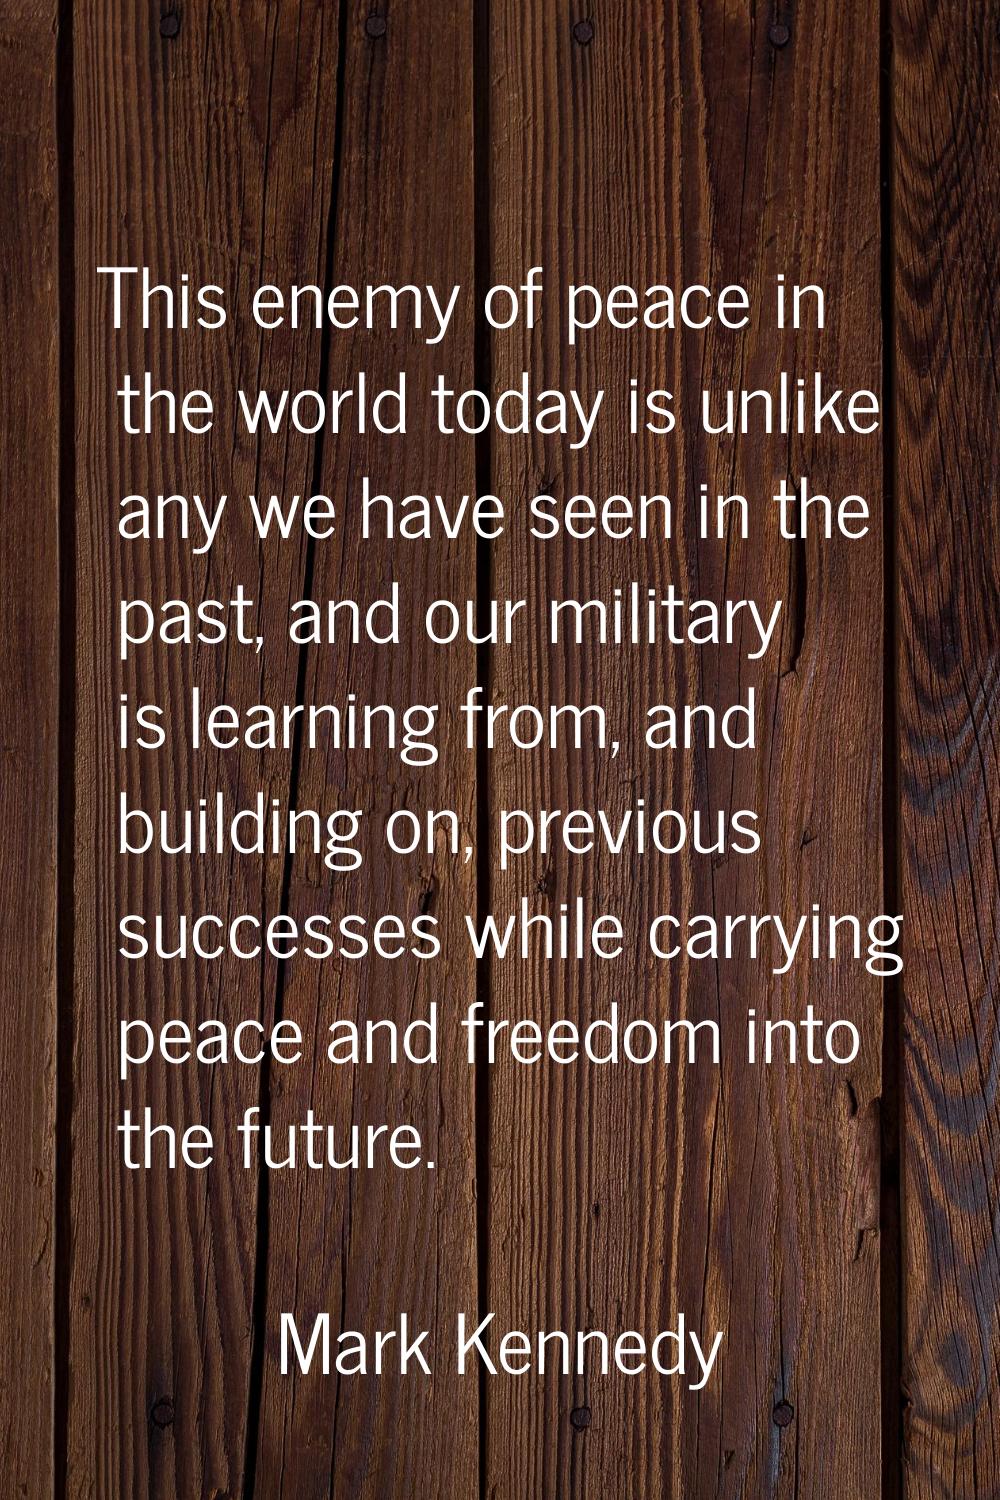 This enemy of peace in the world today is unlike any we have seen in the past, and our military is 